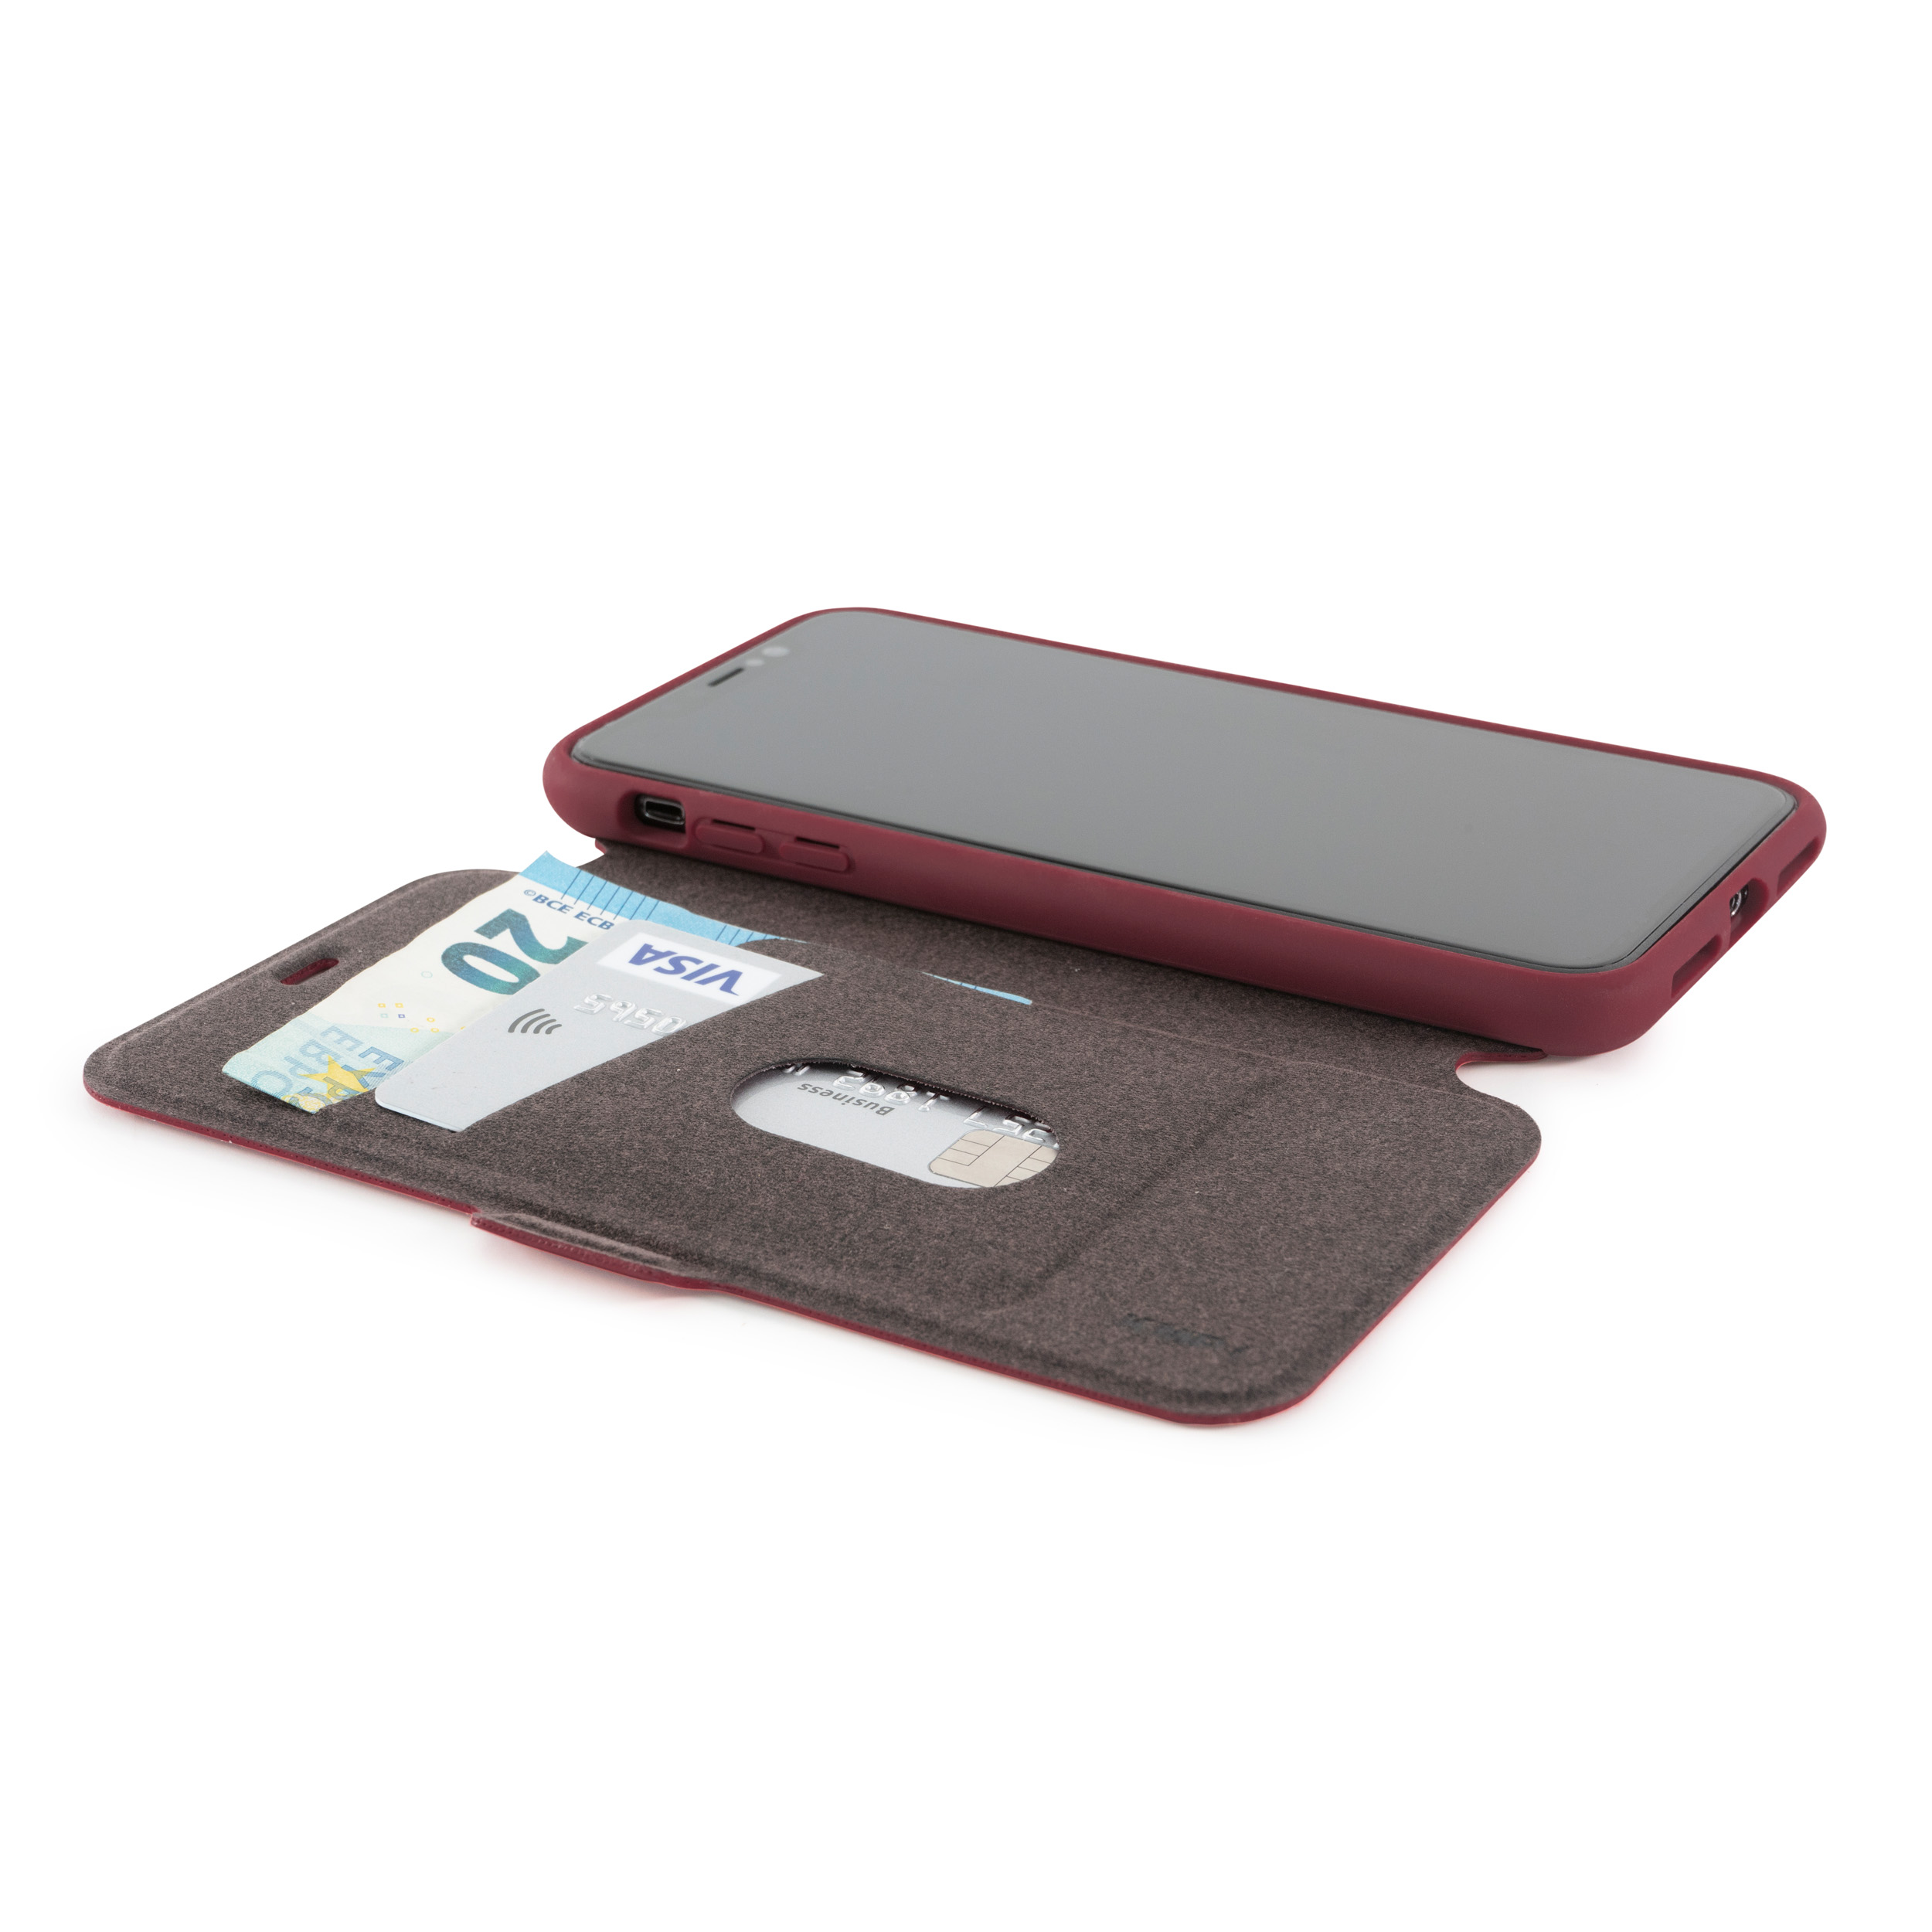 KMP Bookcase Cherry Cover, XS, für X XS, iPhone red Full Red, Apple, IPhone cherry X